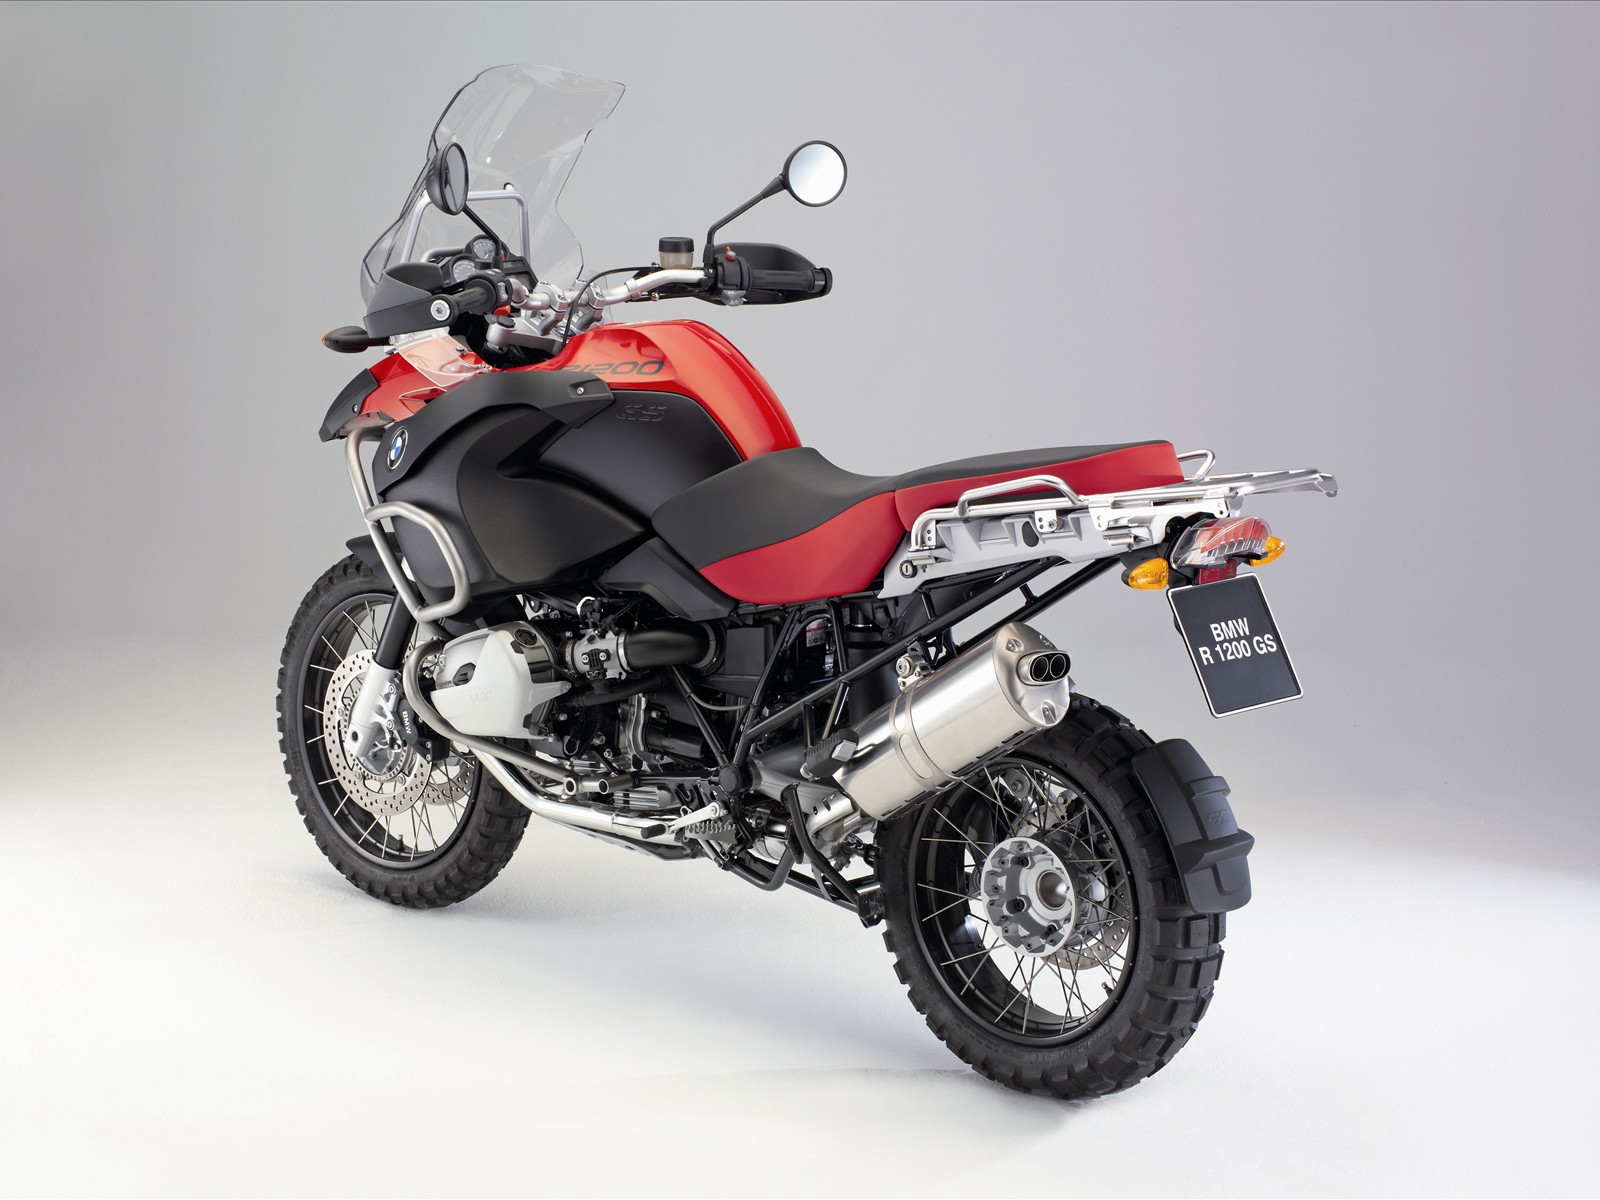 BMW cars, motorcycles, scooters. Pictures, specs, insurance.